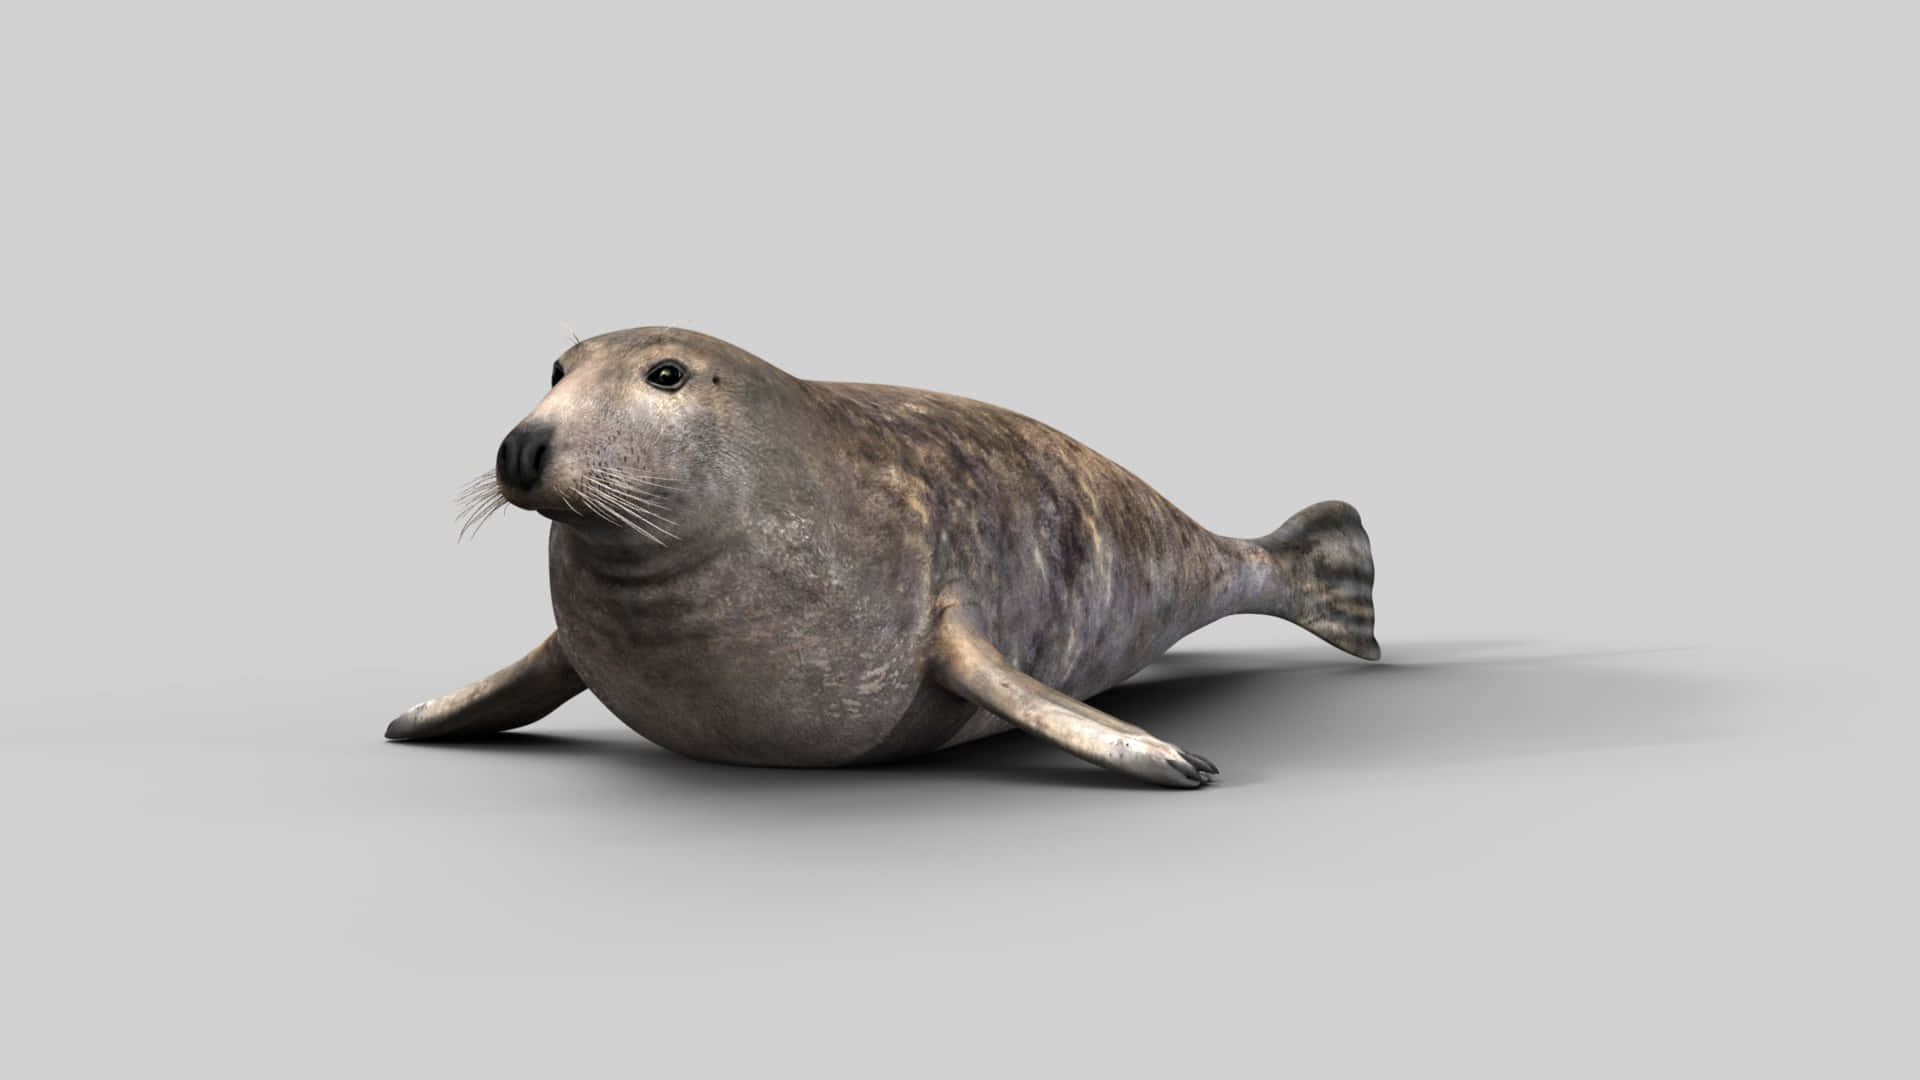 Gray Seal Restingon Solid Background Wallpaper